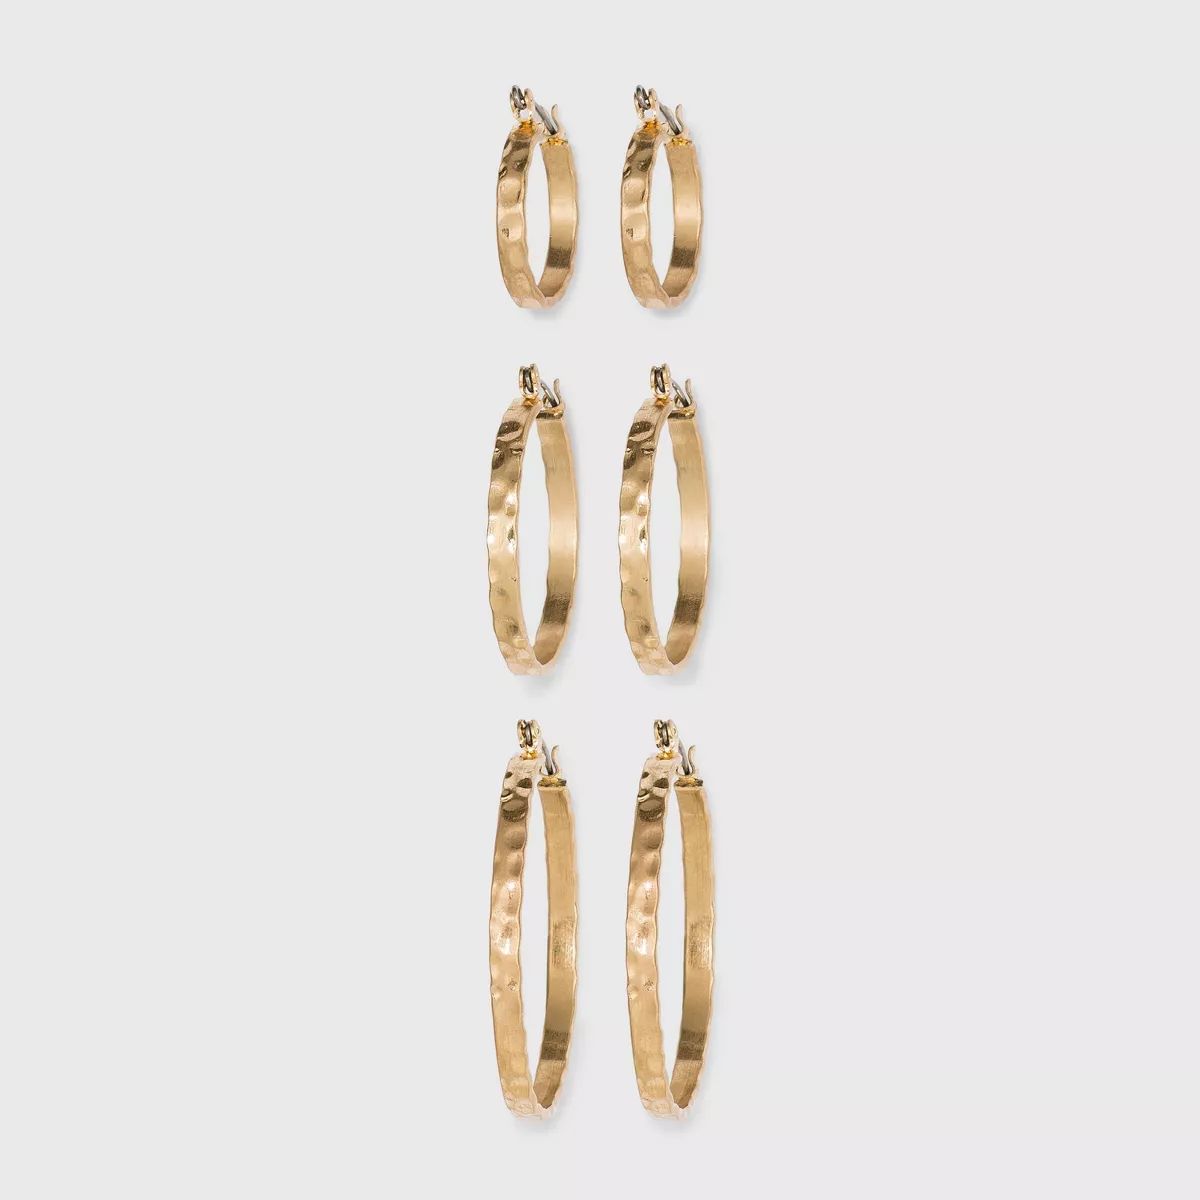 Textured Multi Click Top in Worn Gold Hoop Stud Earring Set 3pc - Universal Thread™ Gold | Target